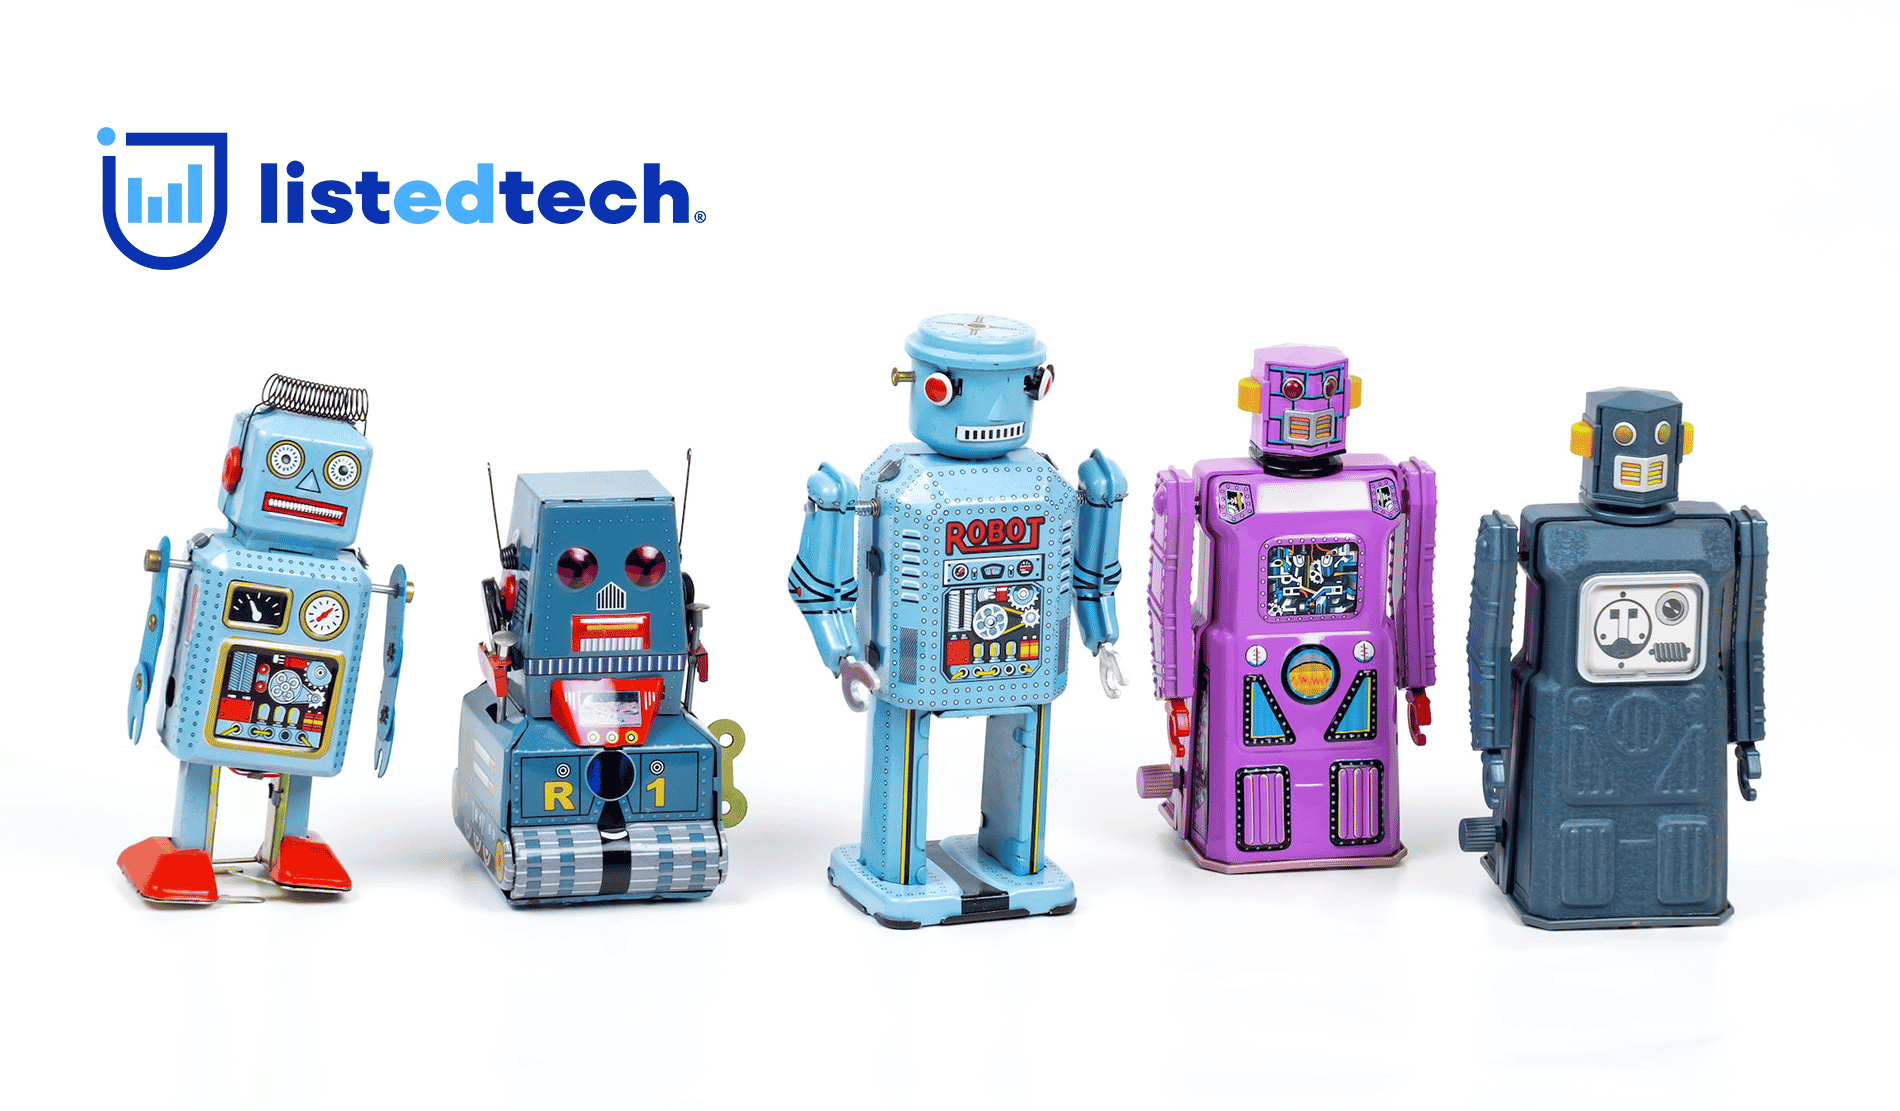 toy robots - Chatbots in Higher Education are Reaching Millions of Students - ListEdTech